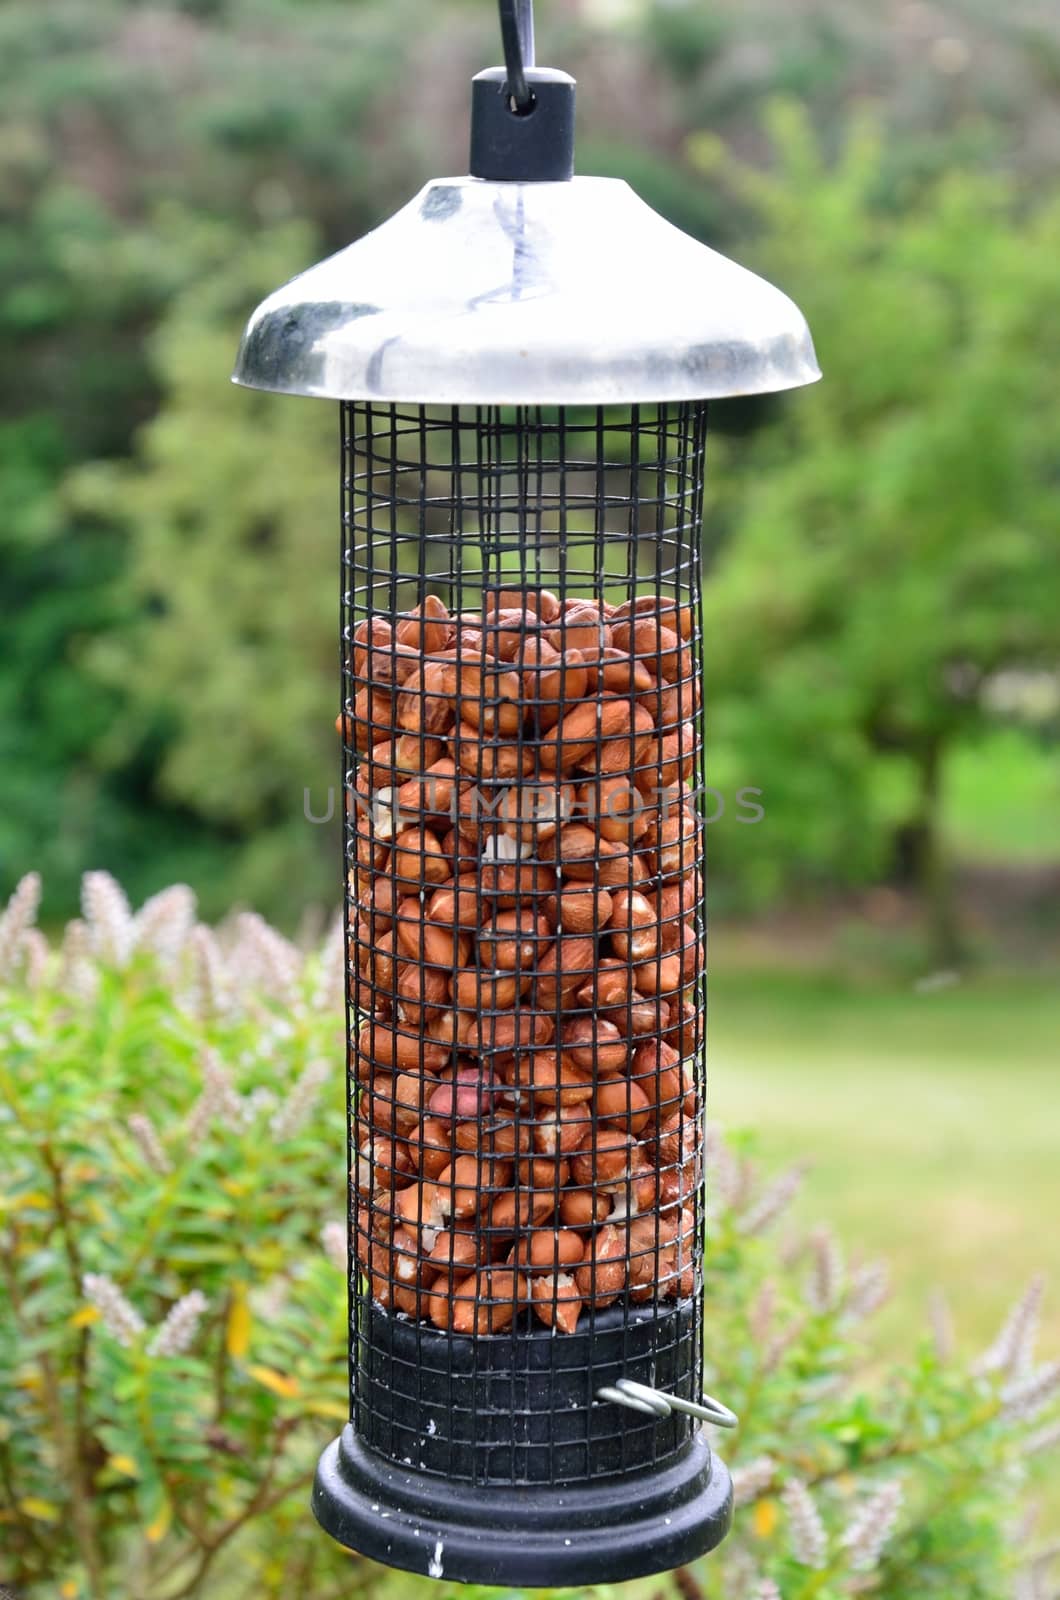 Peanut feeder in cage